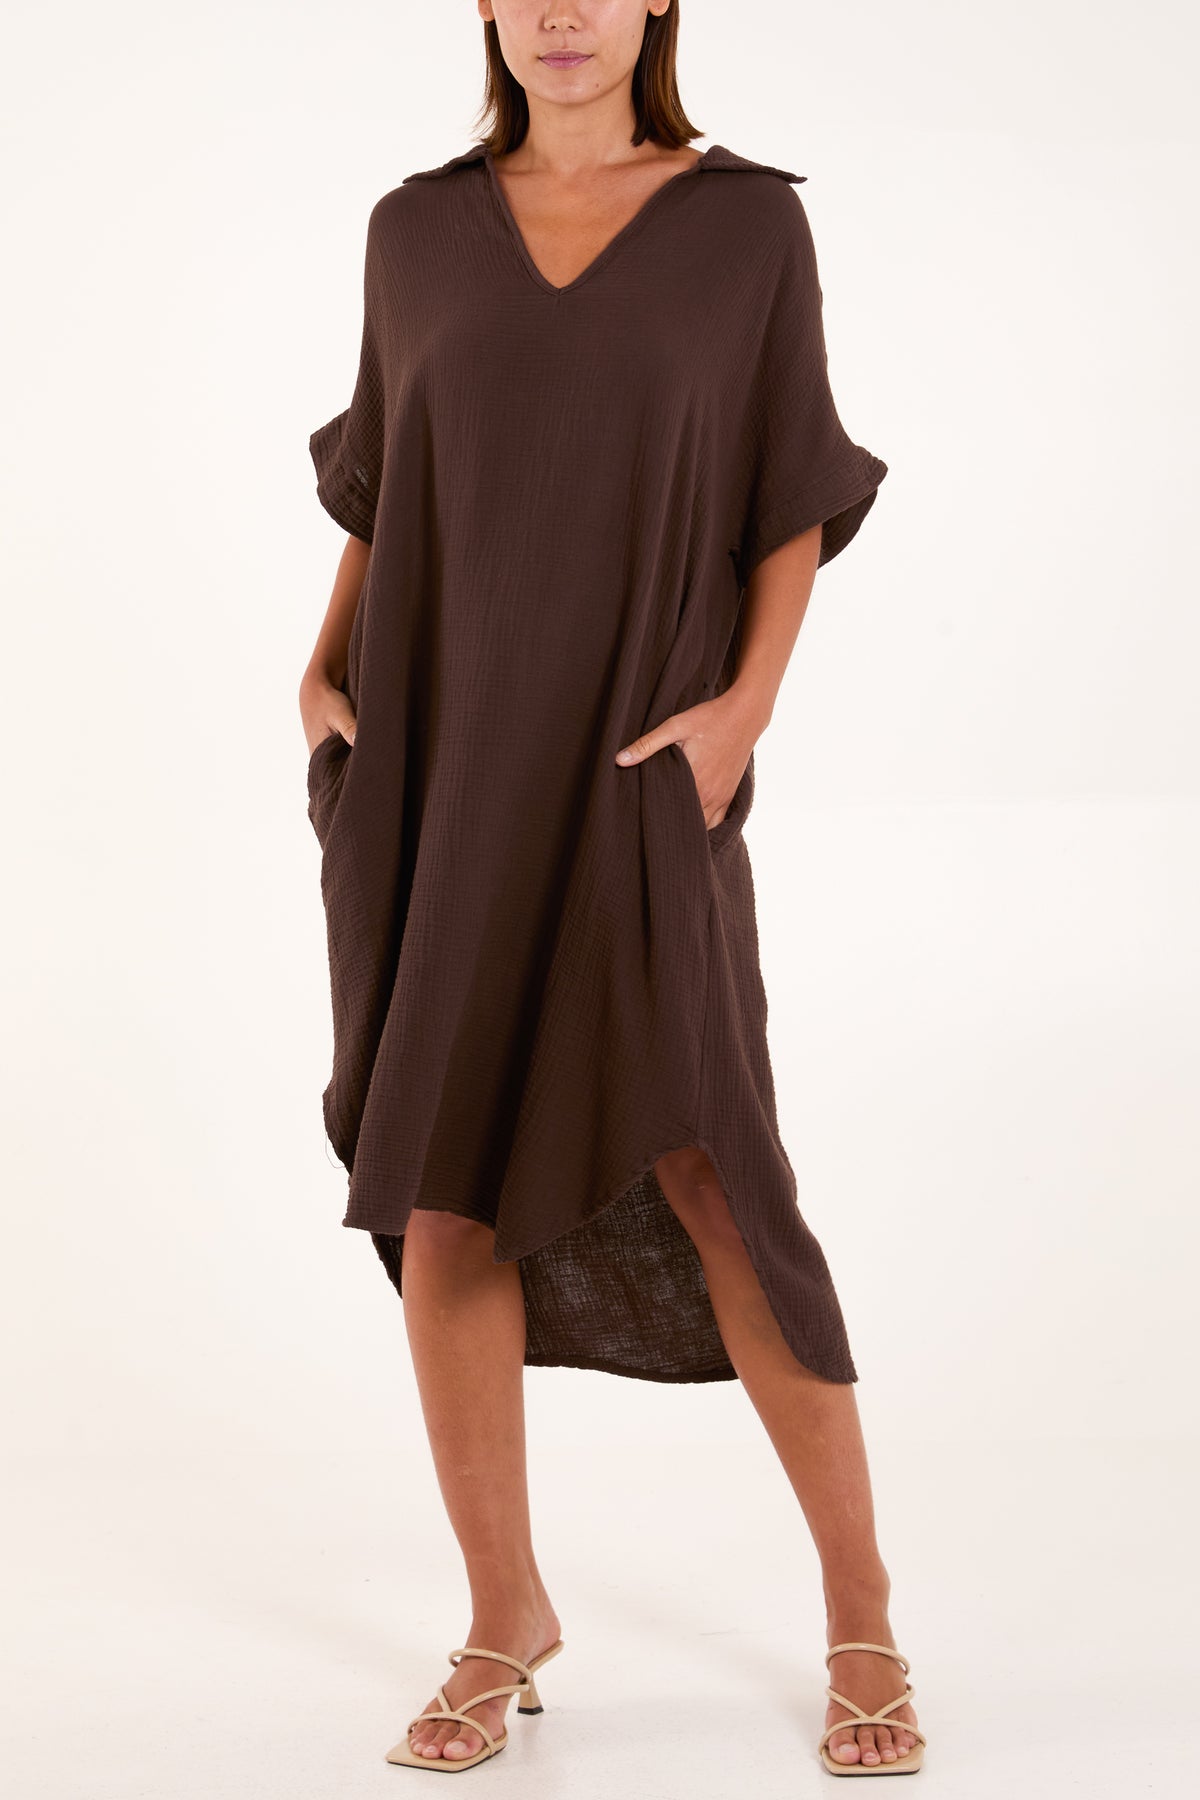 Open Collar Cheesecloth Pockets Dress